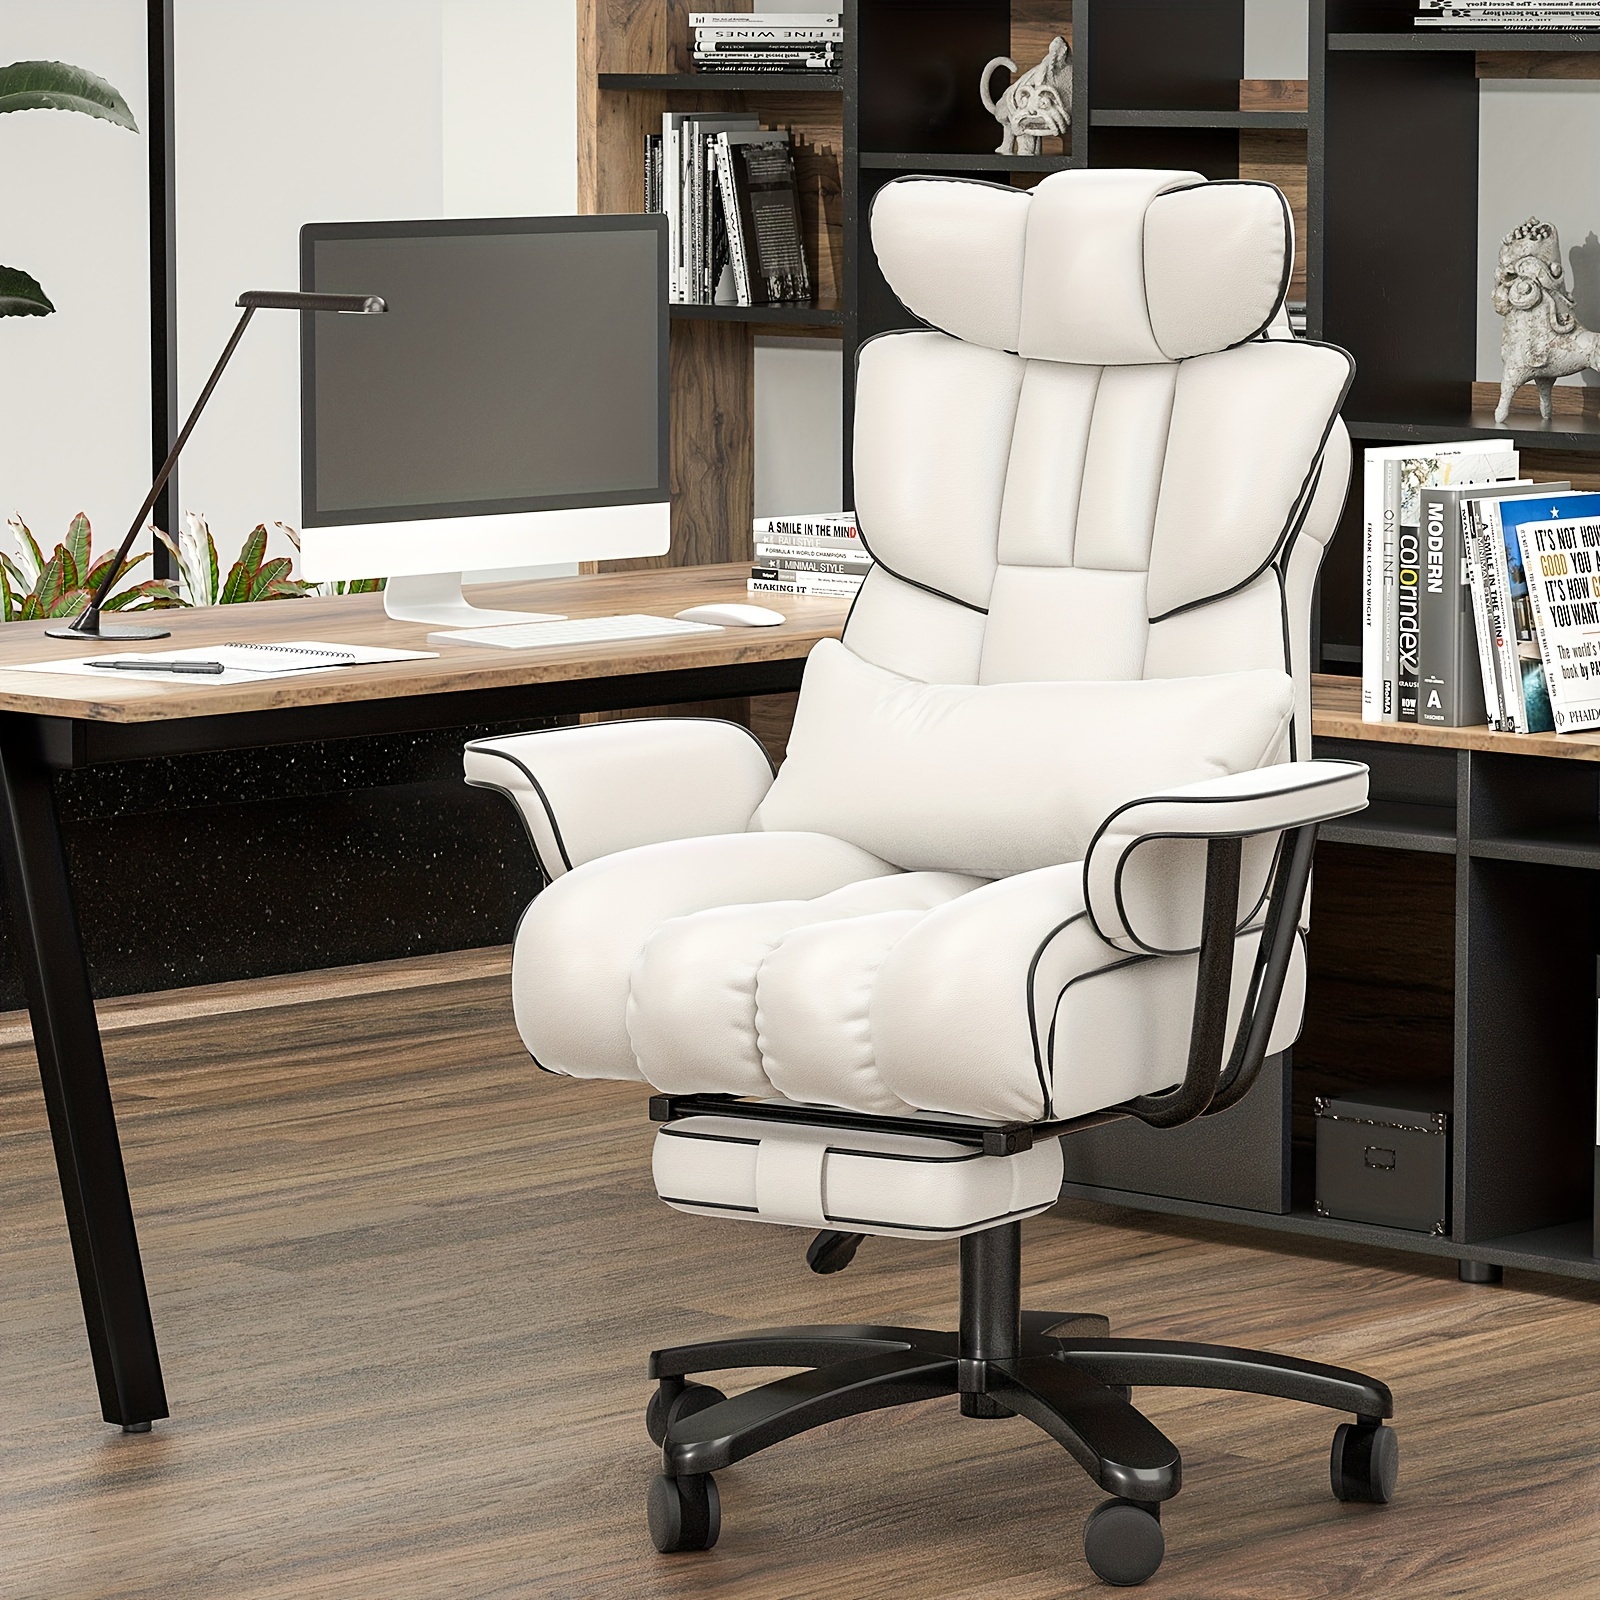 

Big And Tall Office Chair 400lbs, Reclining Executive Desk Chair With Footrest & Lumbar Support, Puls Size Office Chairs For Heavy People, High Back, Wide Seat And Arms, White